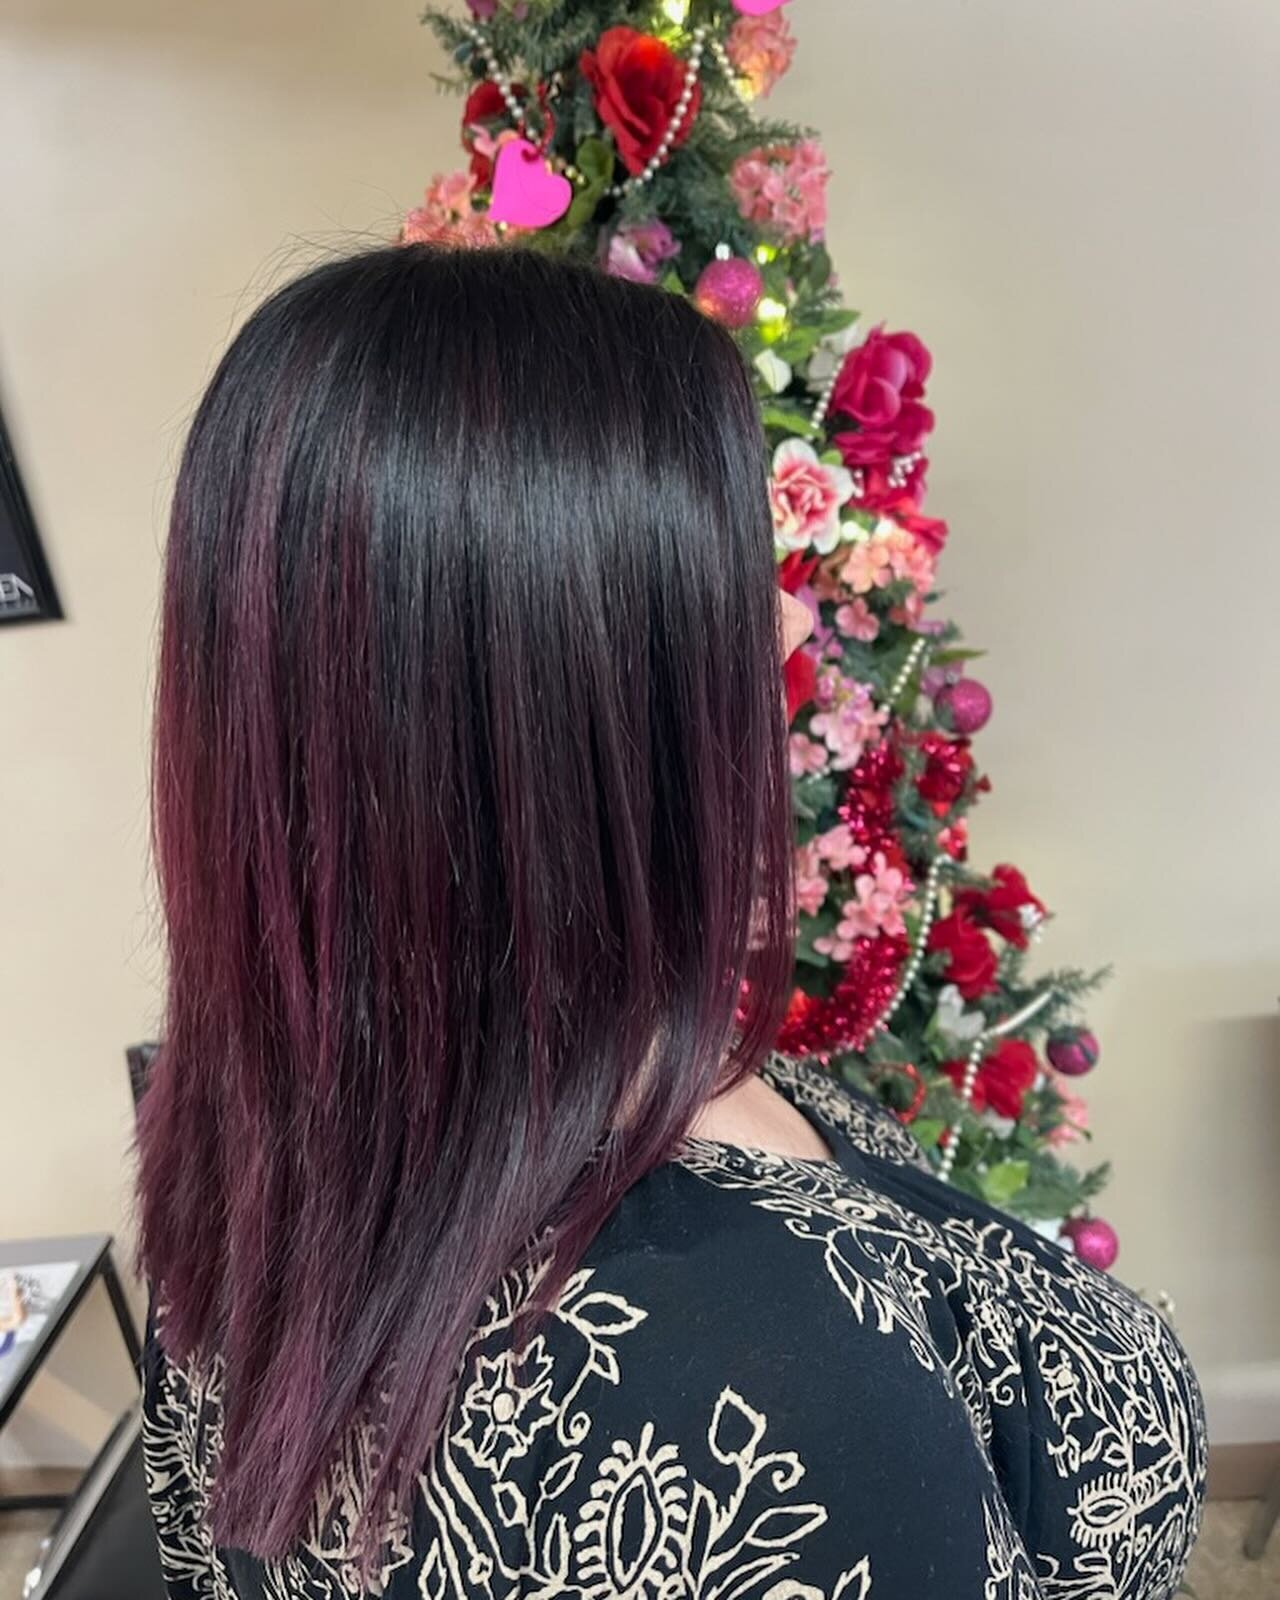 The perfect #pulpriot color for winter😍
Call today to book your appointment! (413)283-2755